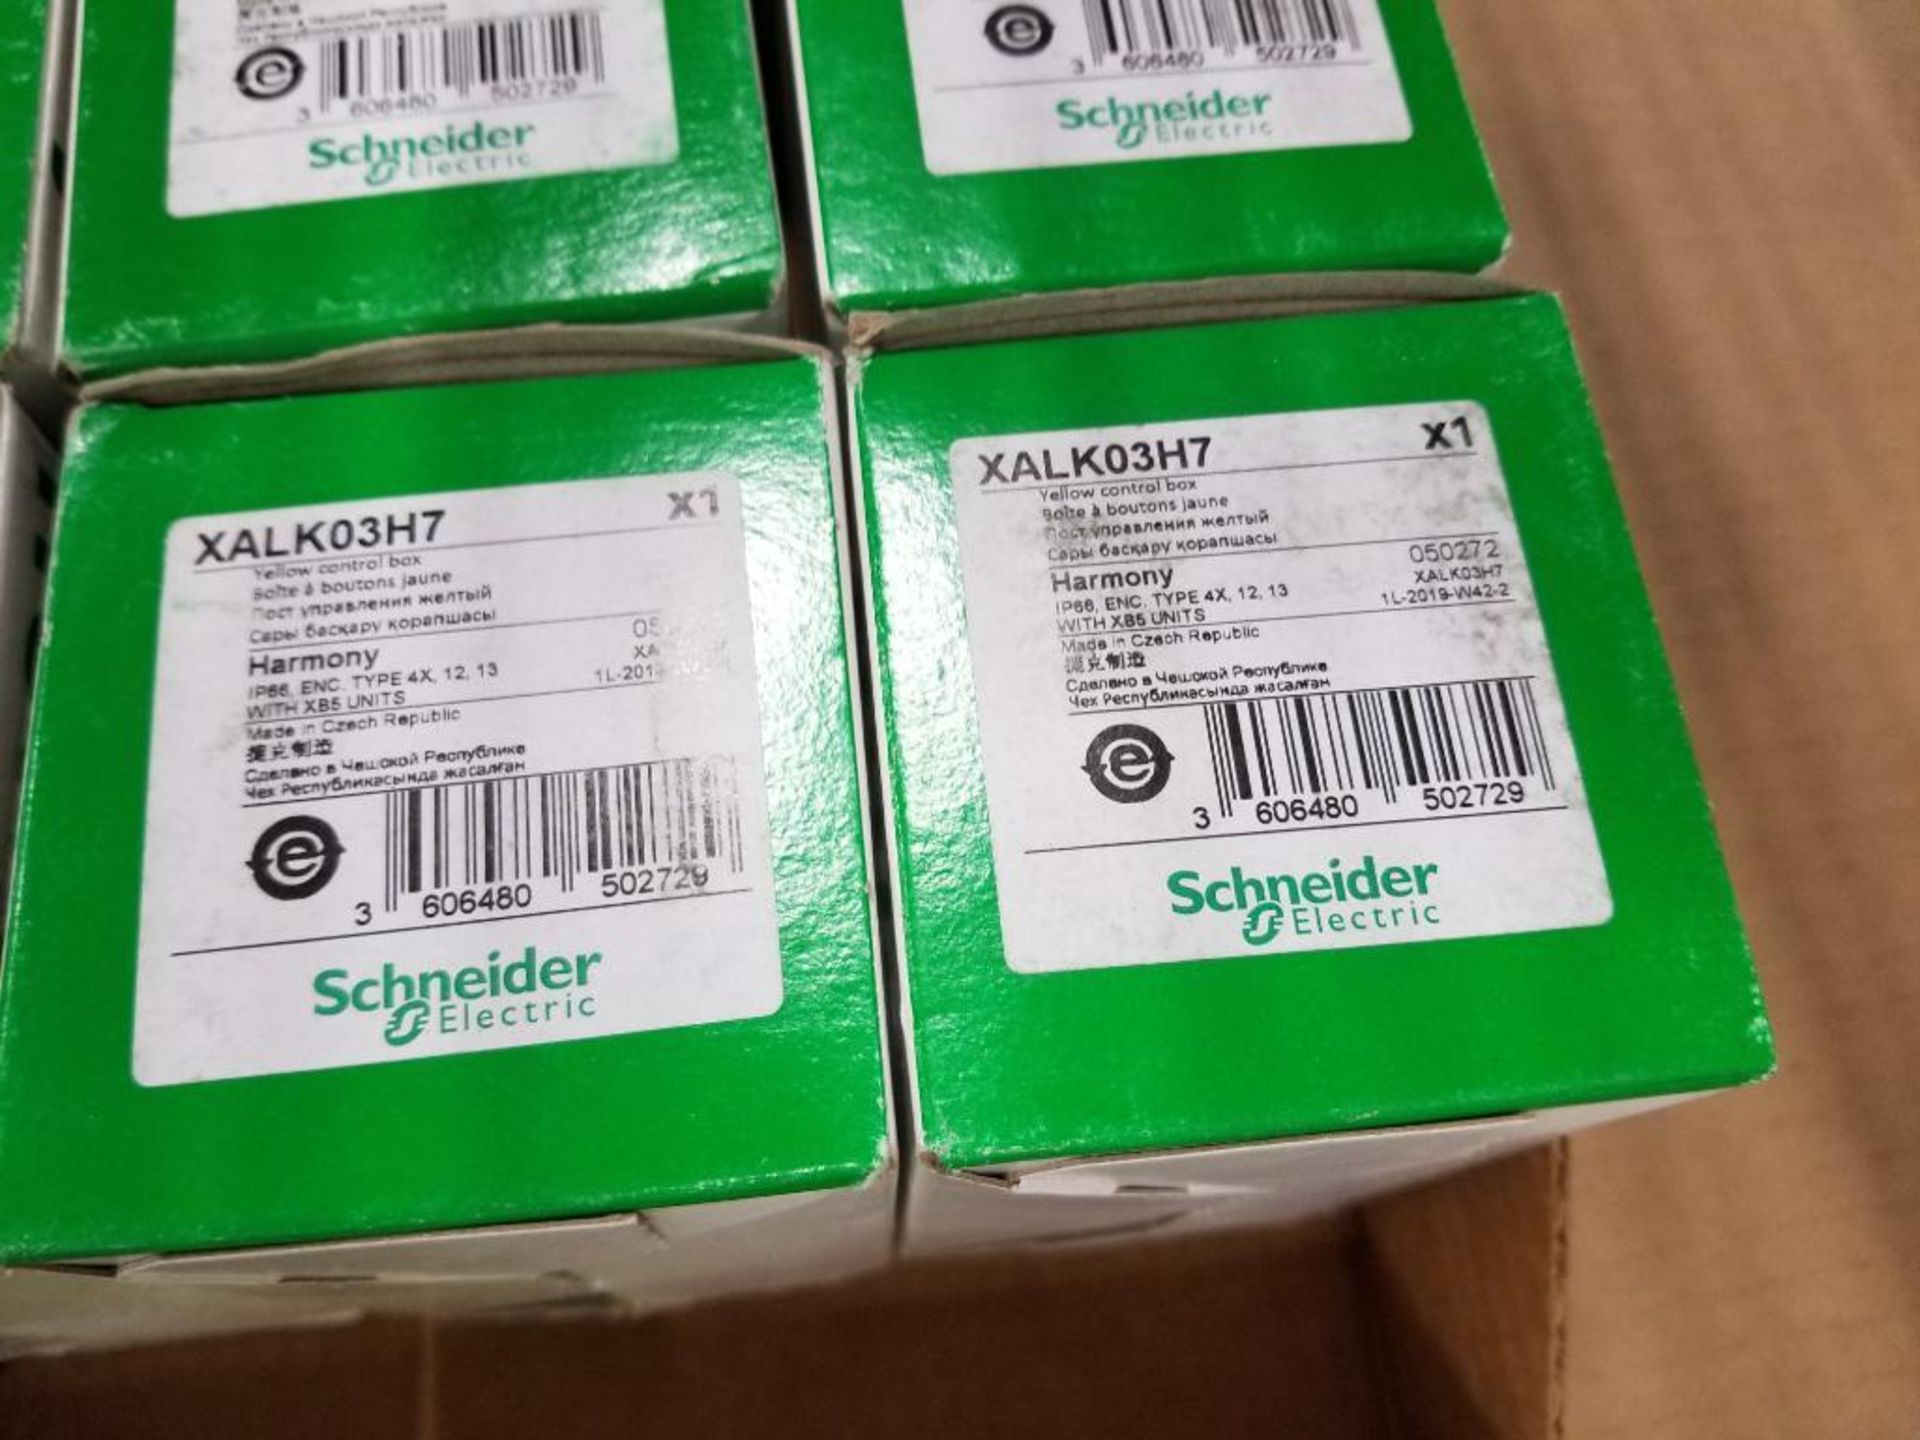 Qty 12 - Schneider Electric XALK03H7 Yellow control box. New in box. - Image 4 of 7